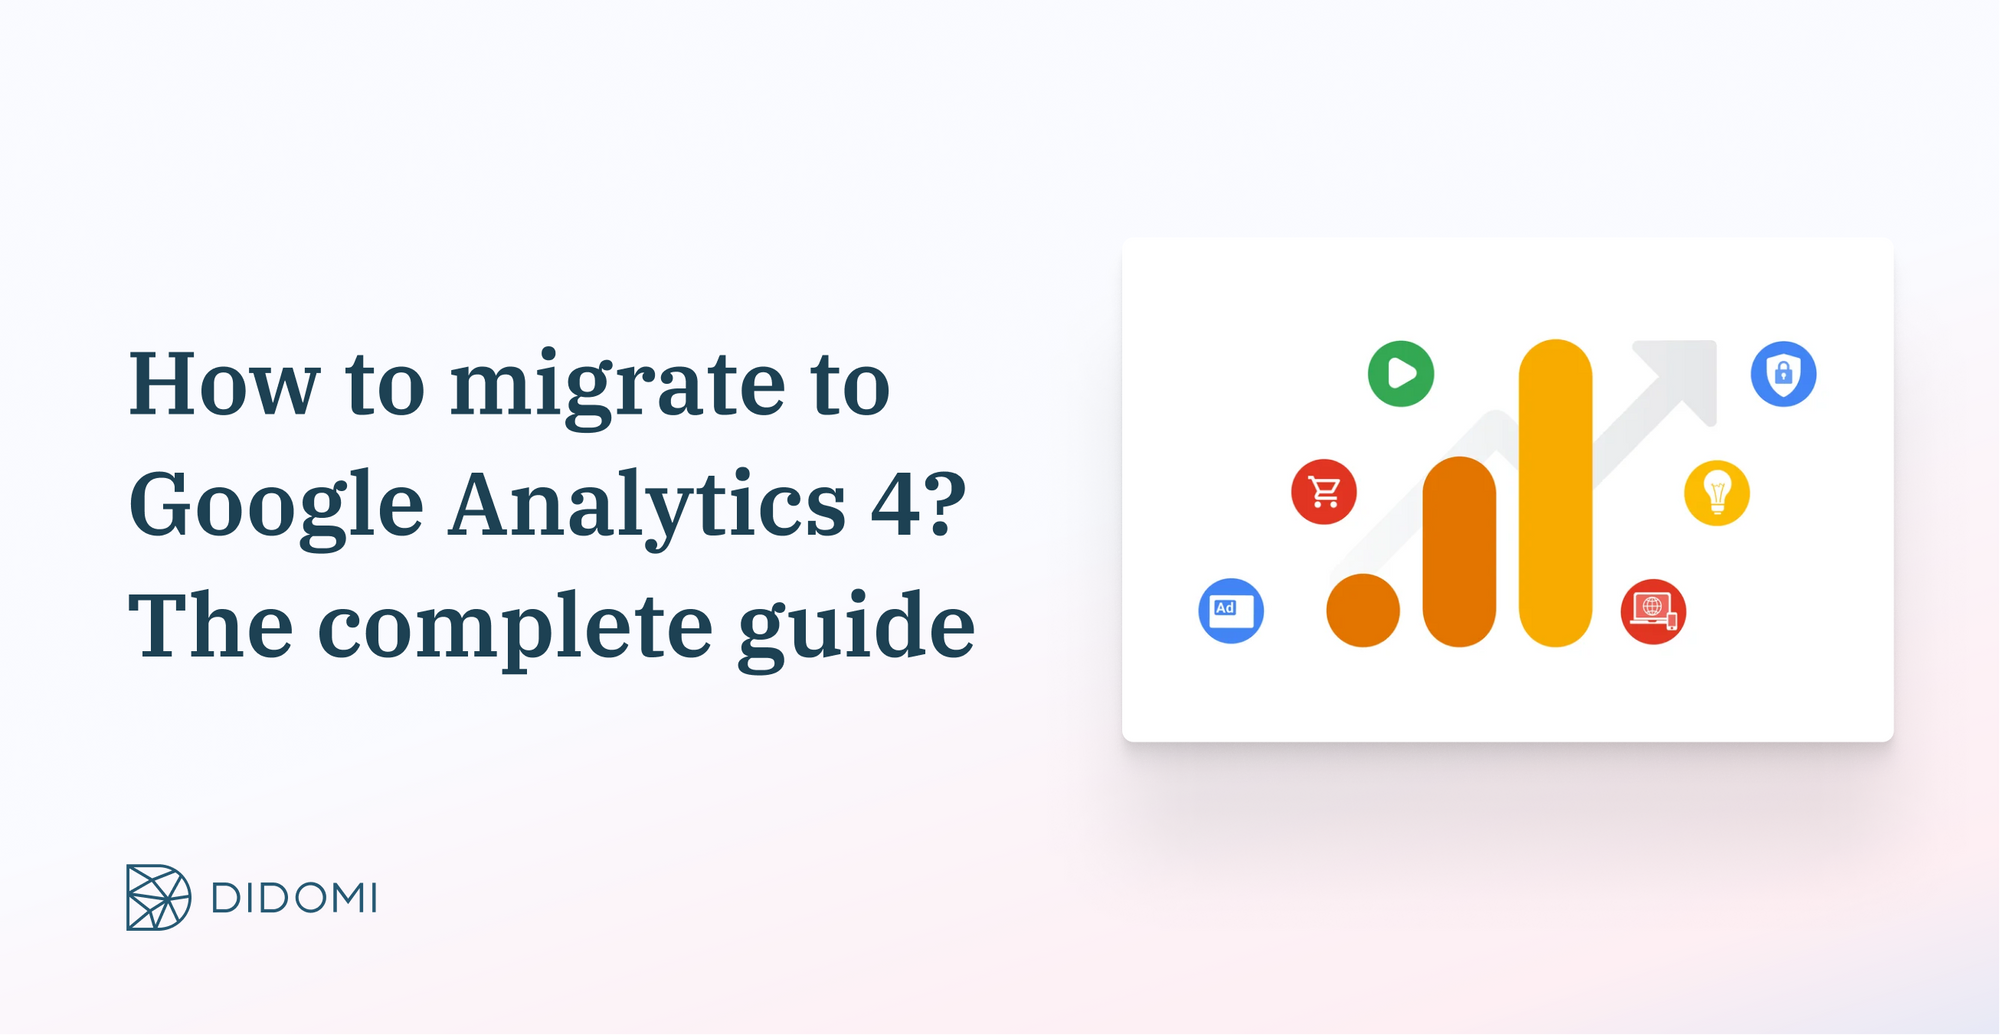 Migrating to Google Analytics 4 (GA4): what you need to know